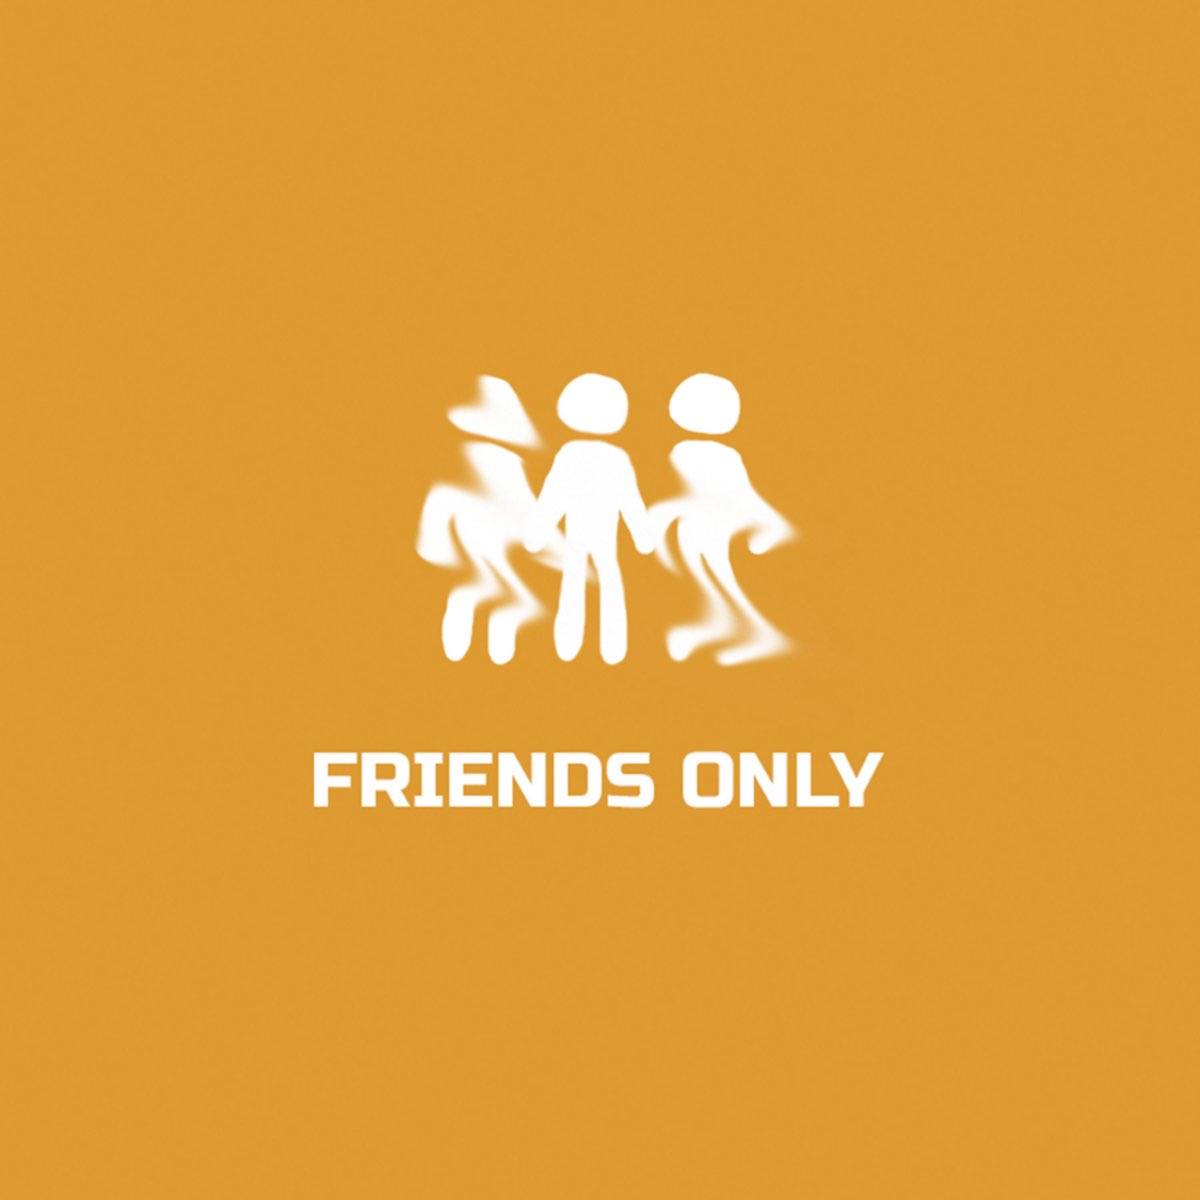 Compilation only. Онли френдс. Only friends. Be only friends.